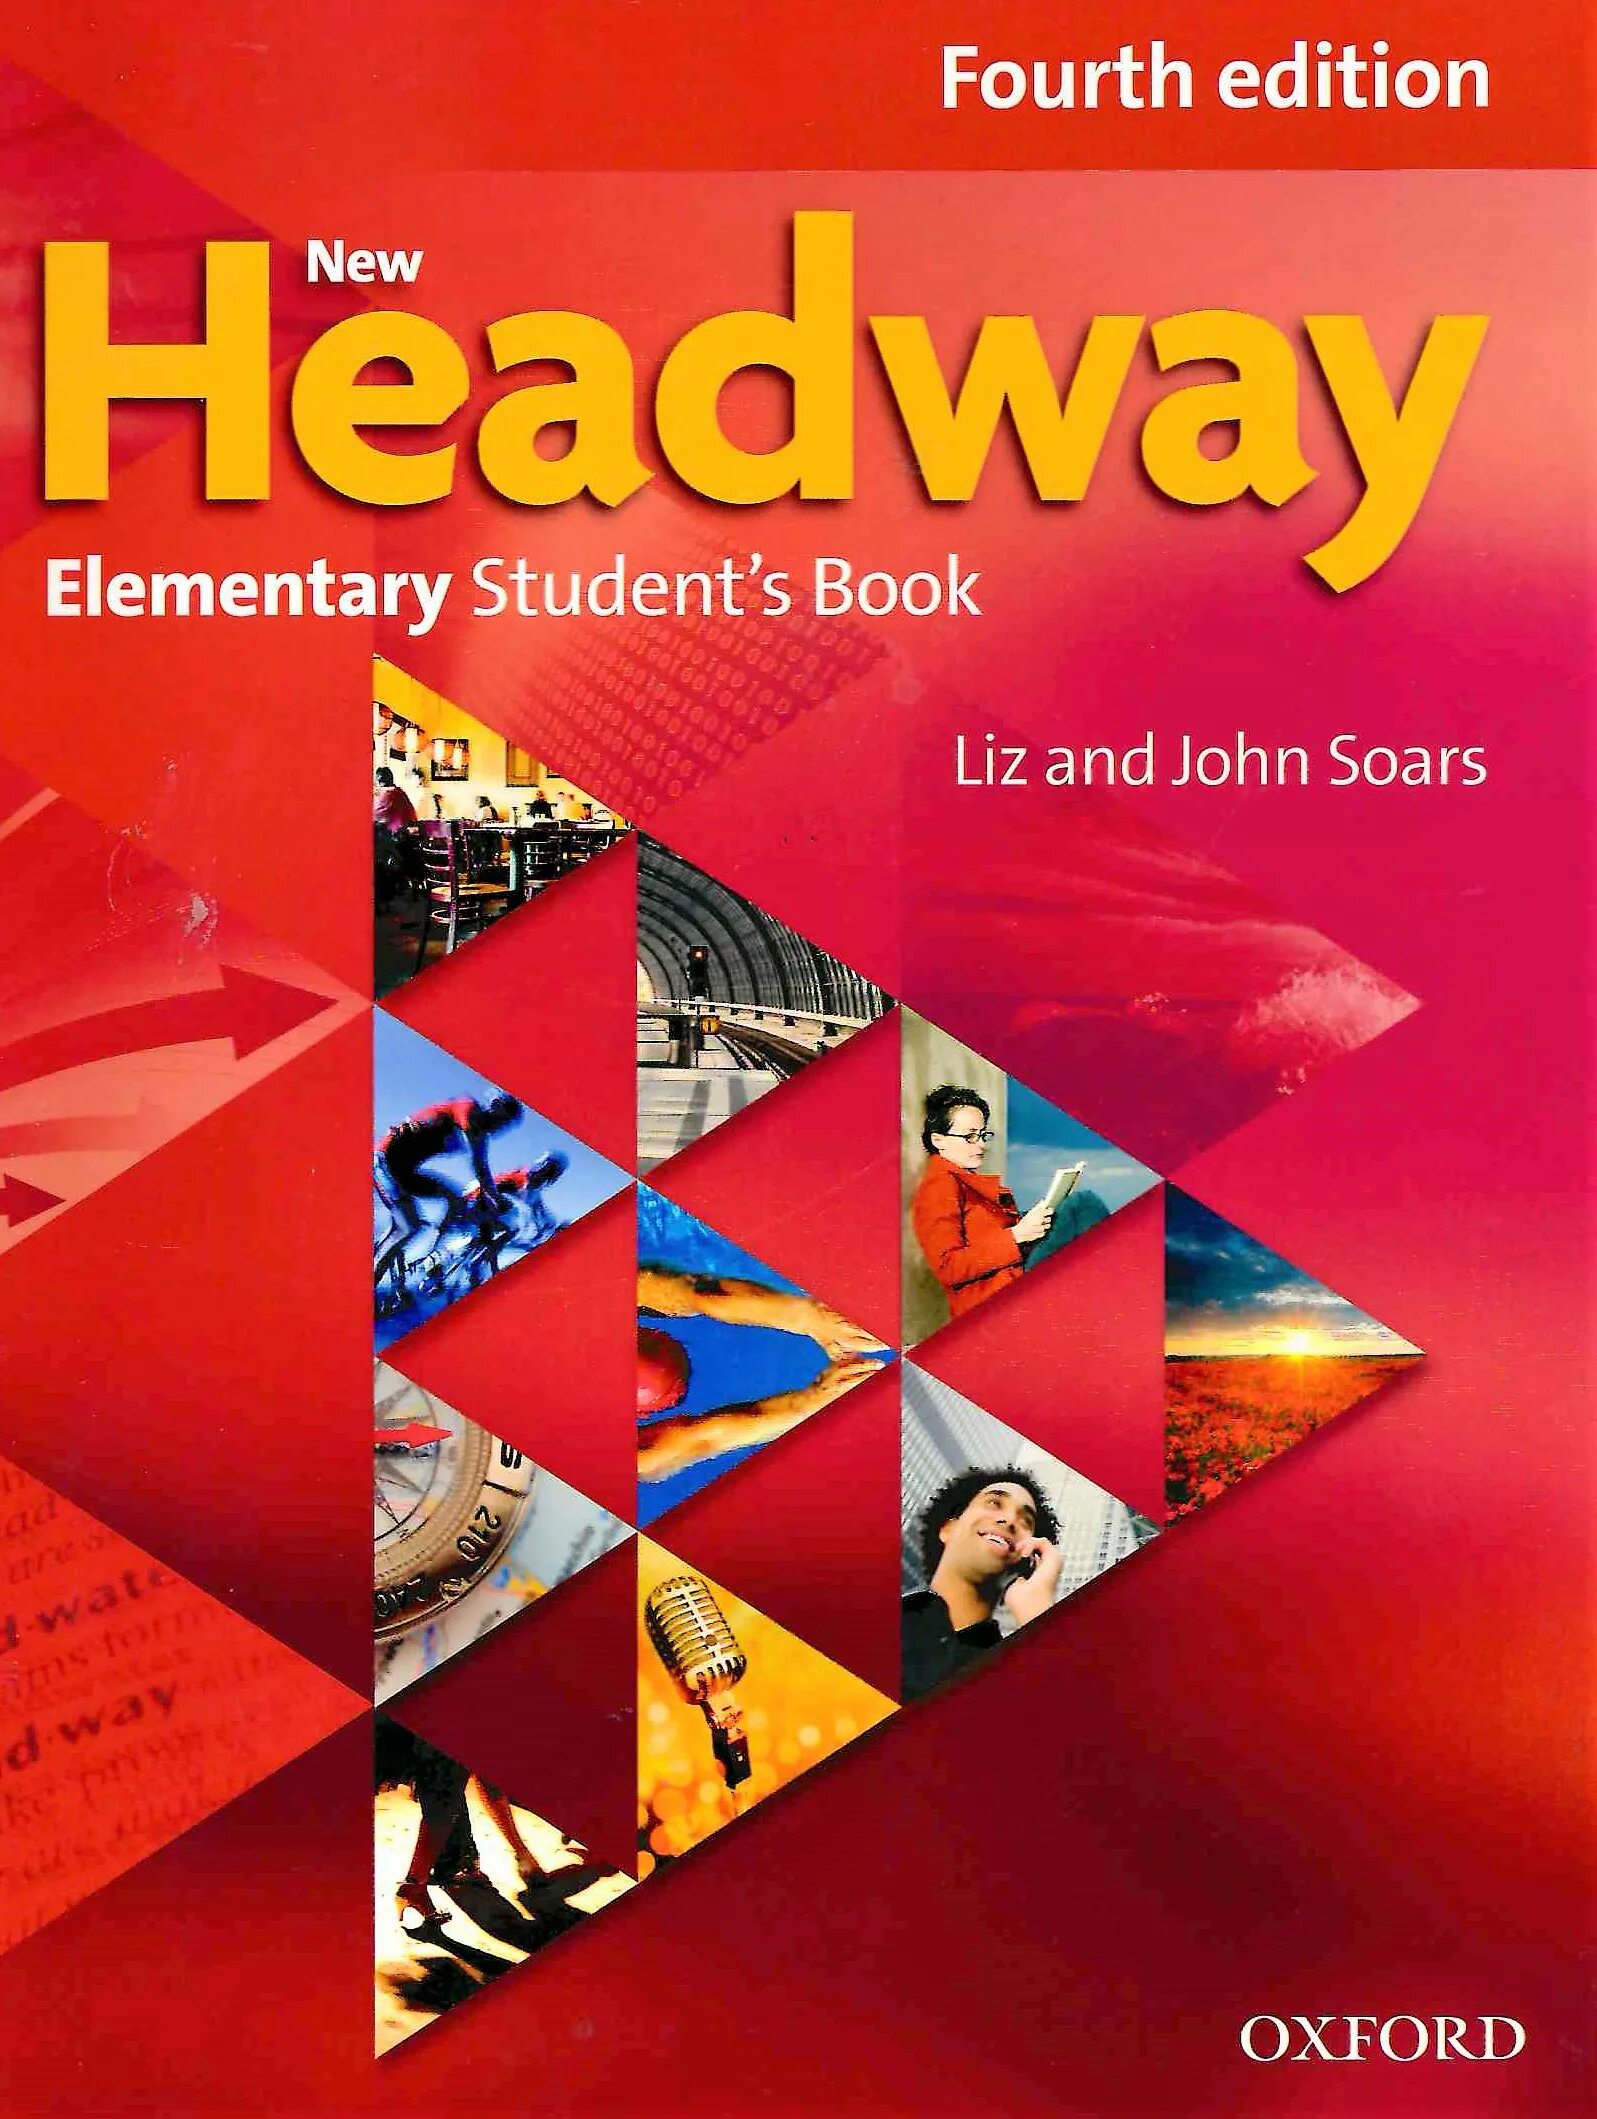 New Headway Elementary 3rd Edition. New Headway Beginner 4th Edition. New Headway Elementary Audio 4th Edition. New Headway Elementary 4th Edition.